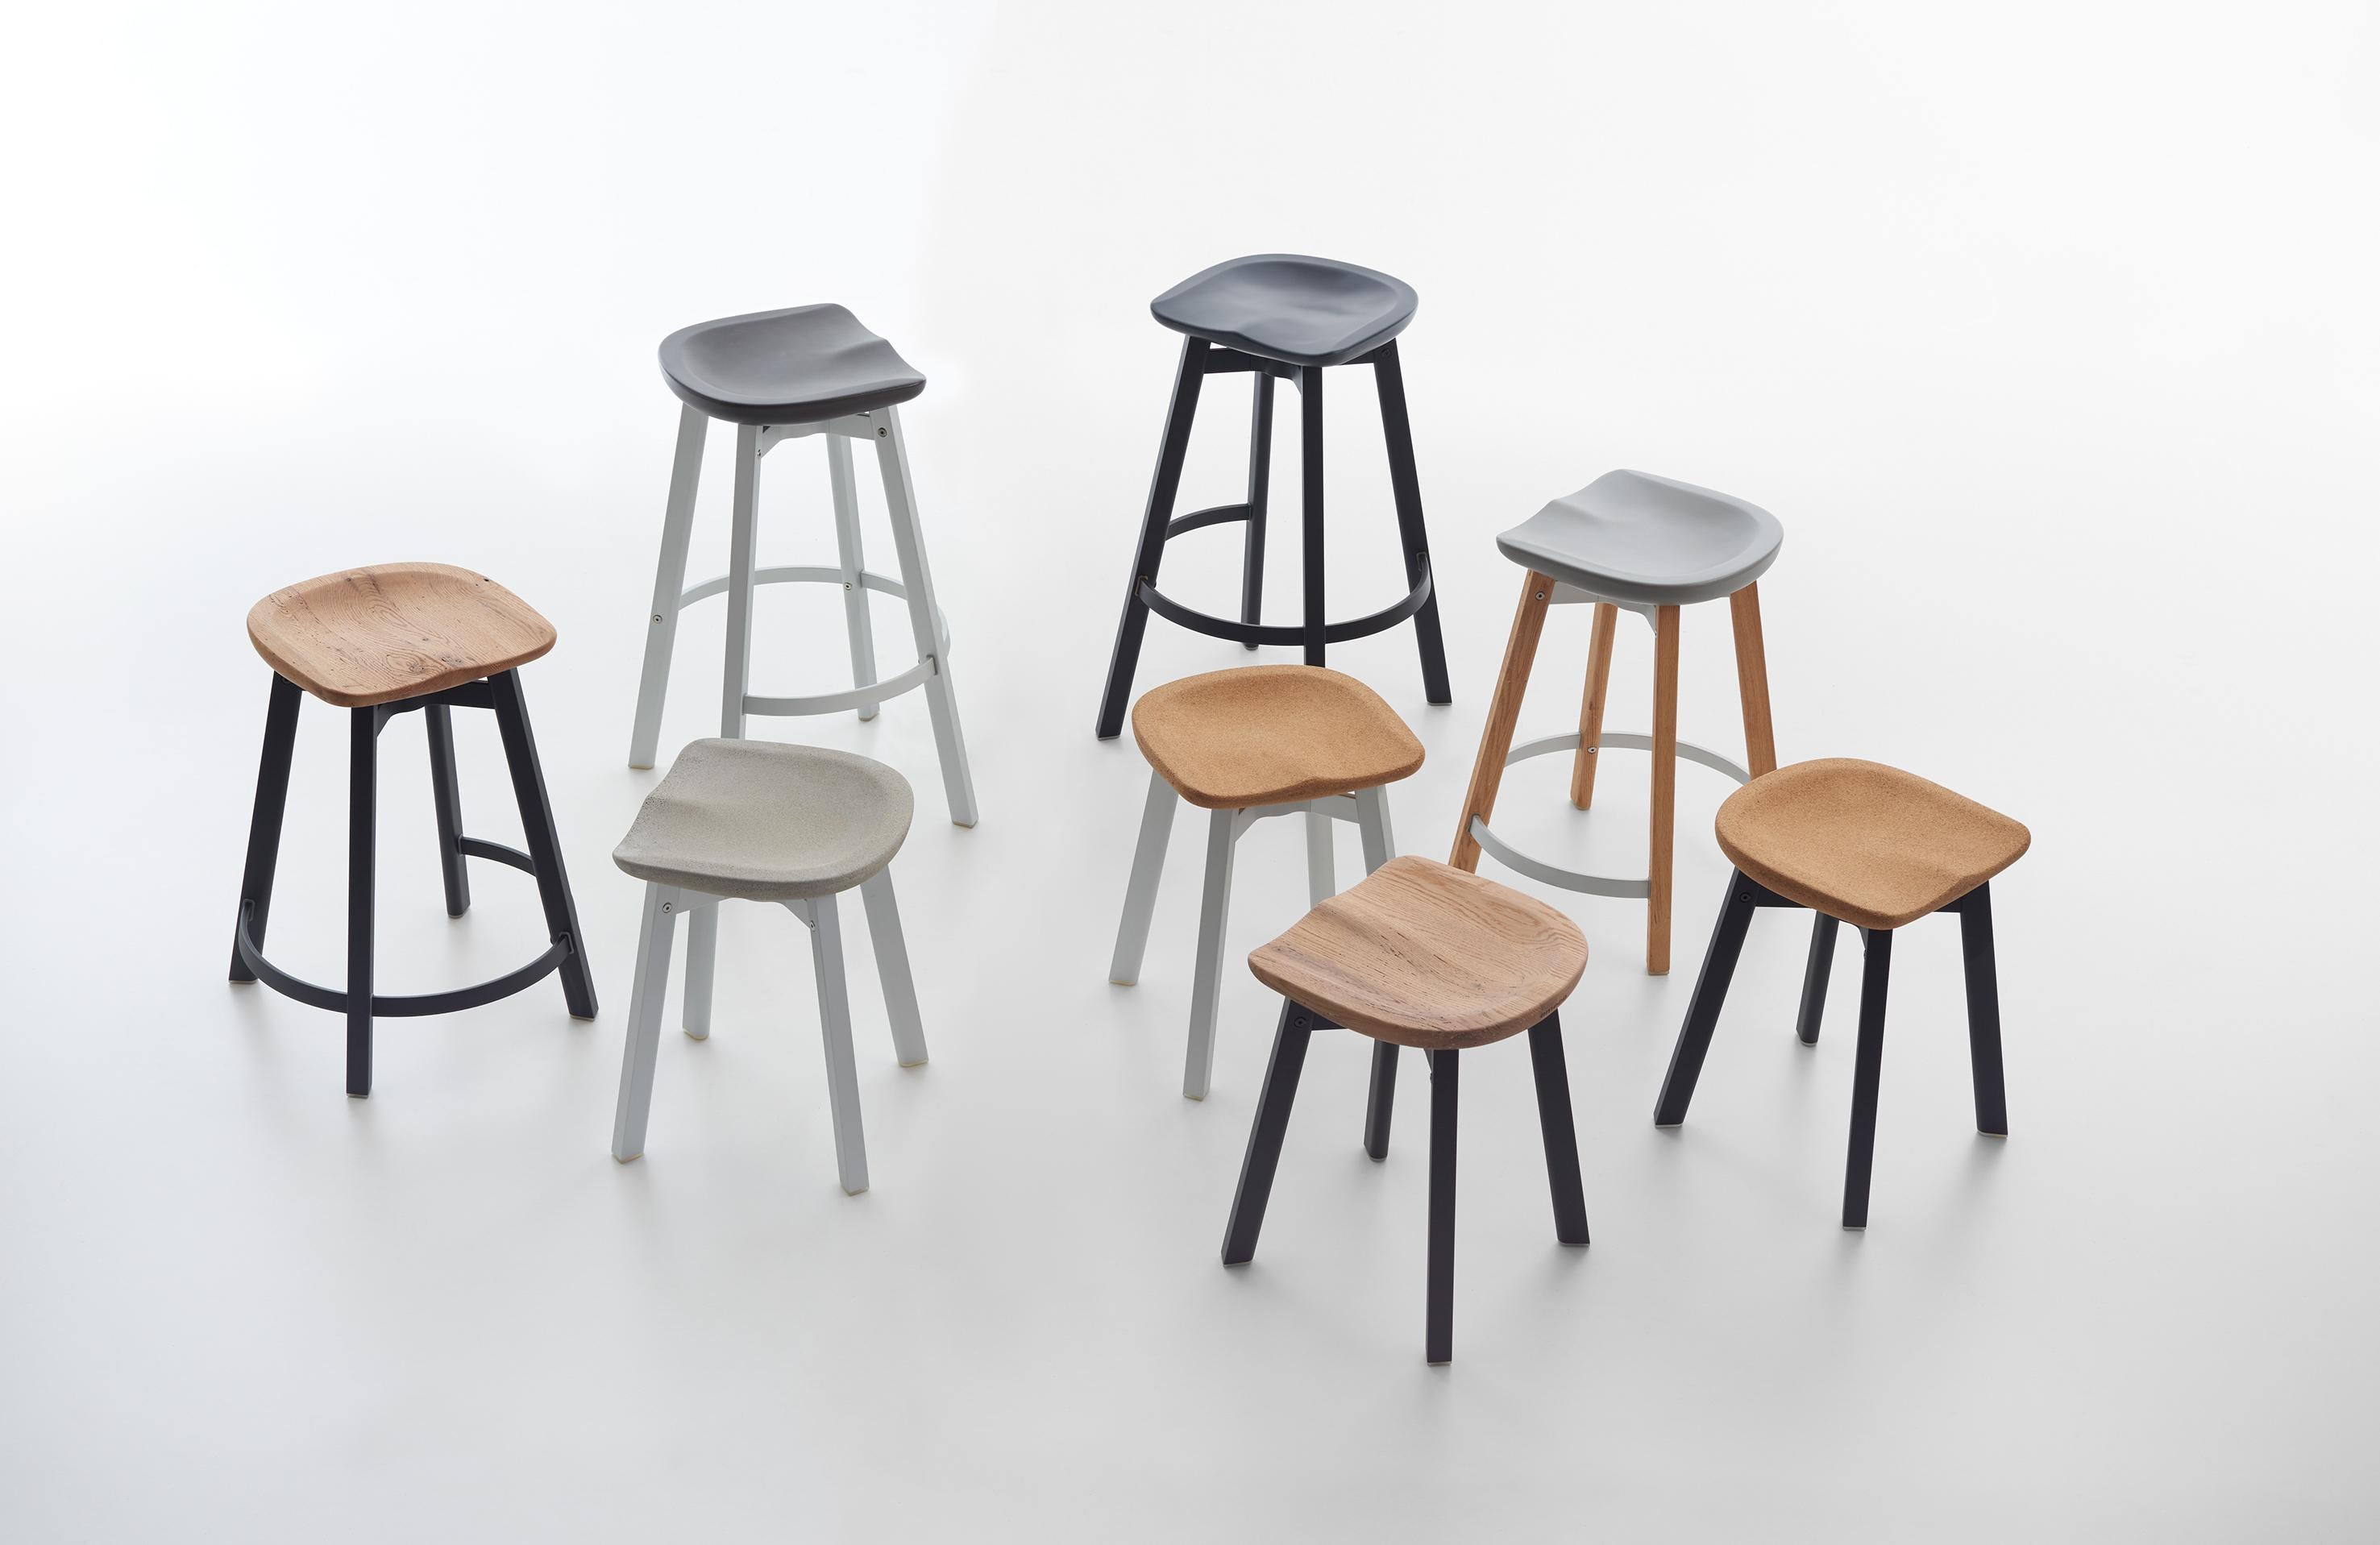 American Emeco Su Barstool in Black Aluminum with Flint Seat by Nendo